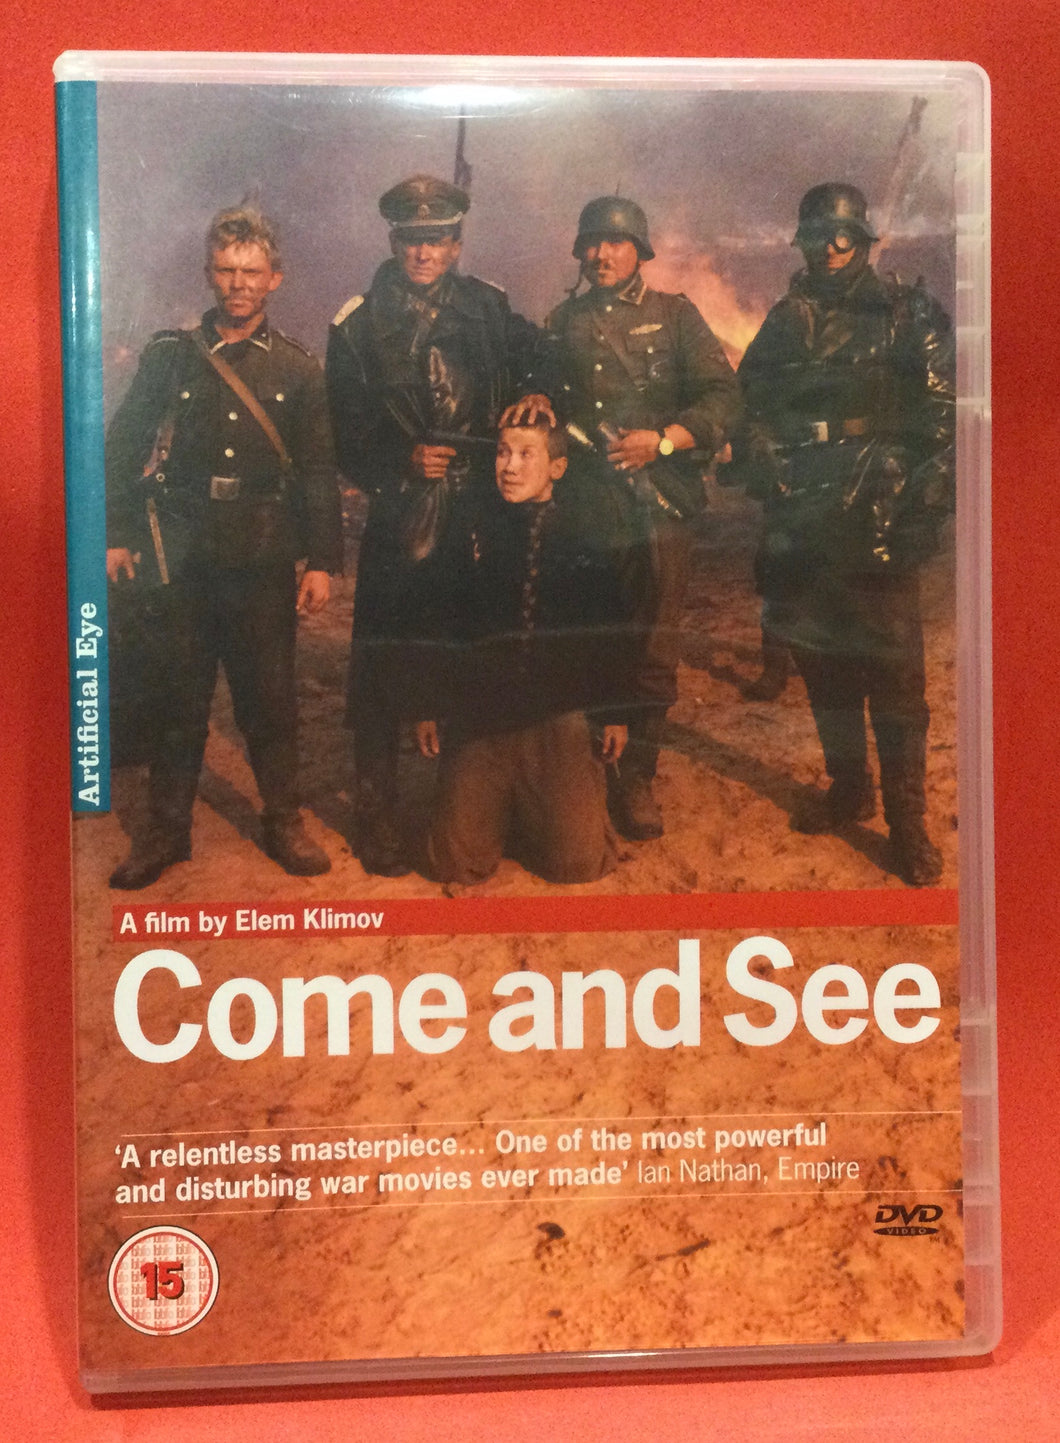 COME AND SEE - DVD (USED)